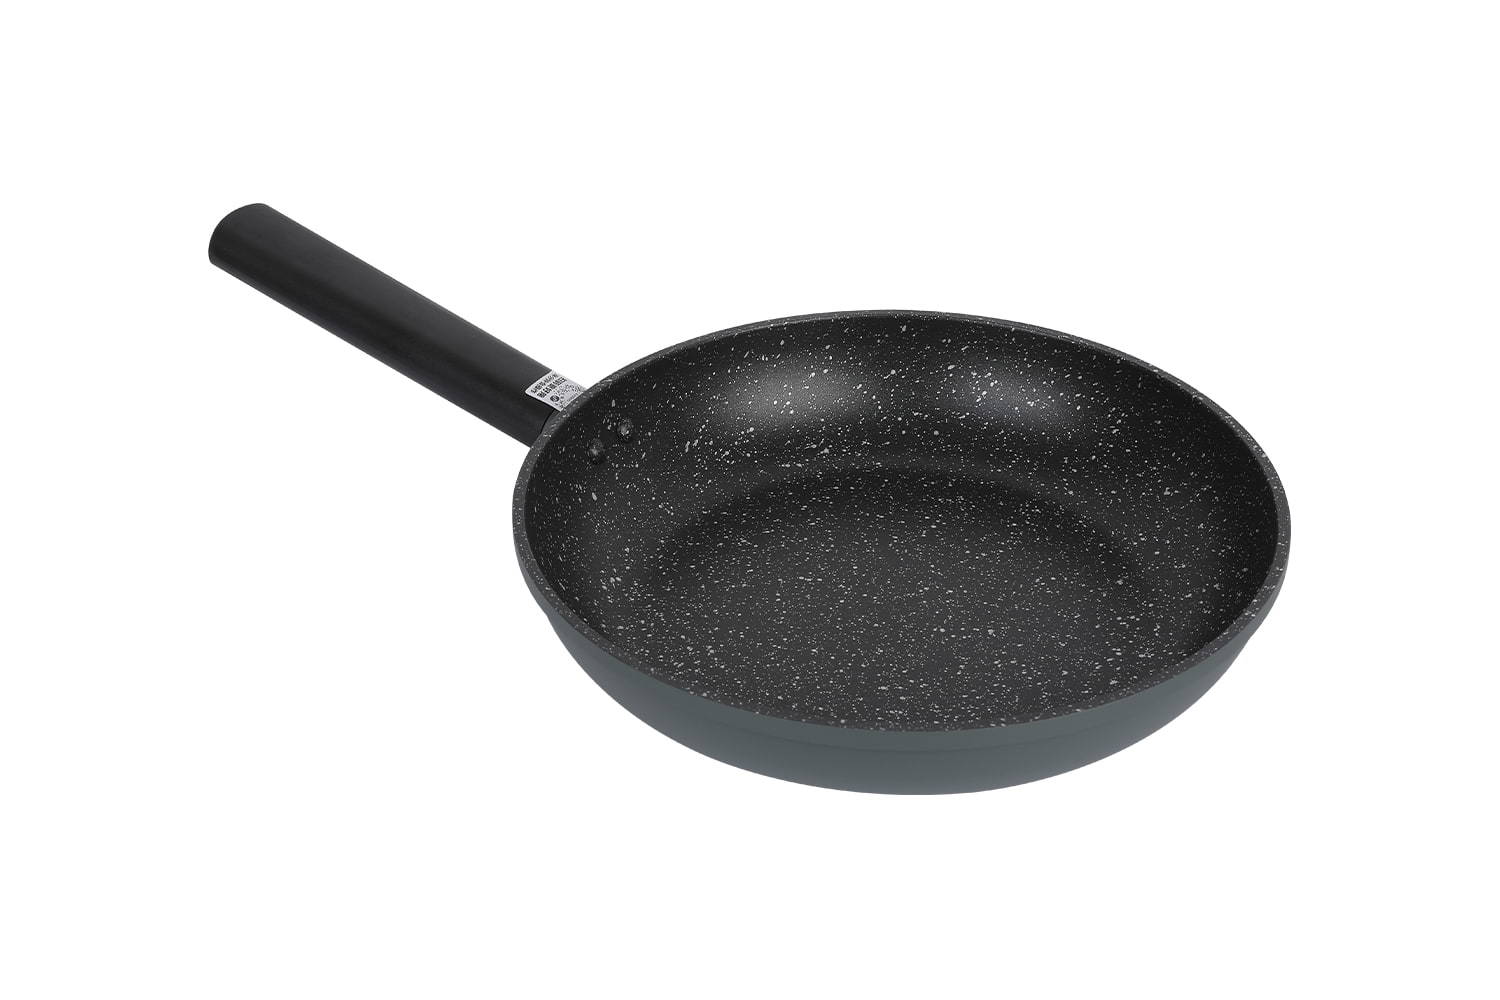 CF-JLW2663D Imitation die-casting frying pan-No glass lid, imitation die-cast medical stone non-stick 26 frying pan